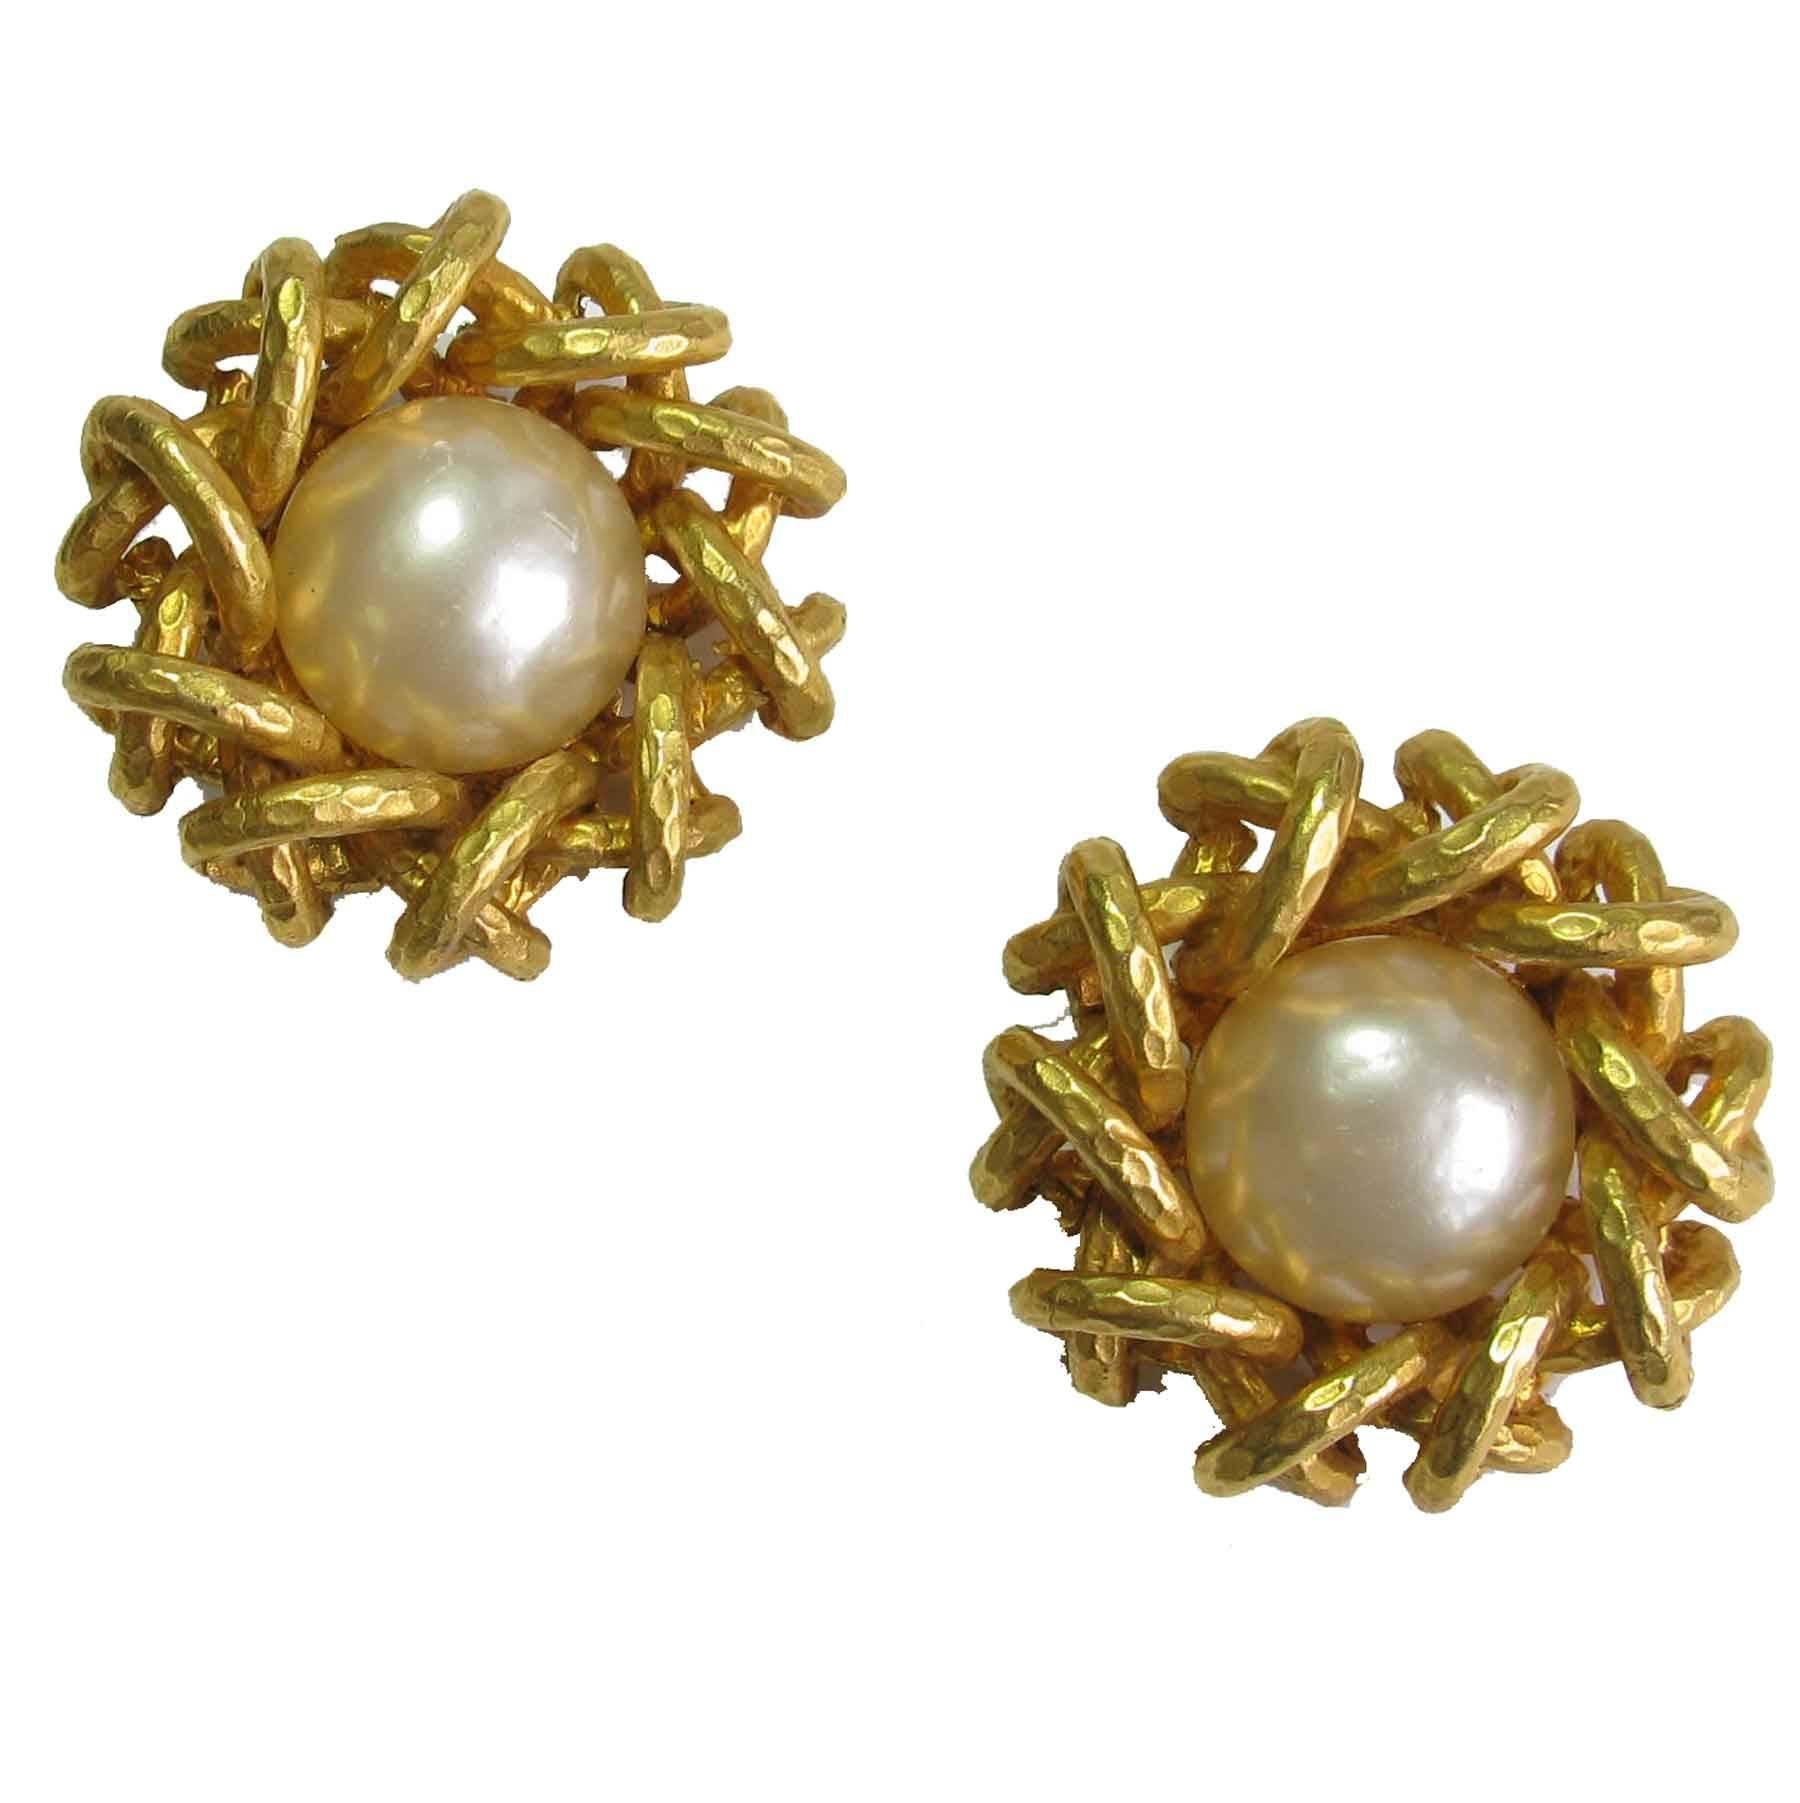 CHANEL Clip-on Earrings in Hammered Gilded Metal and Pearly Bead